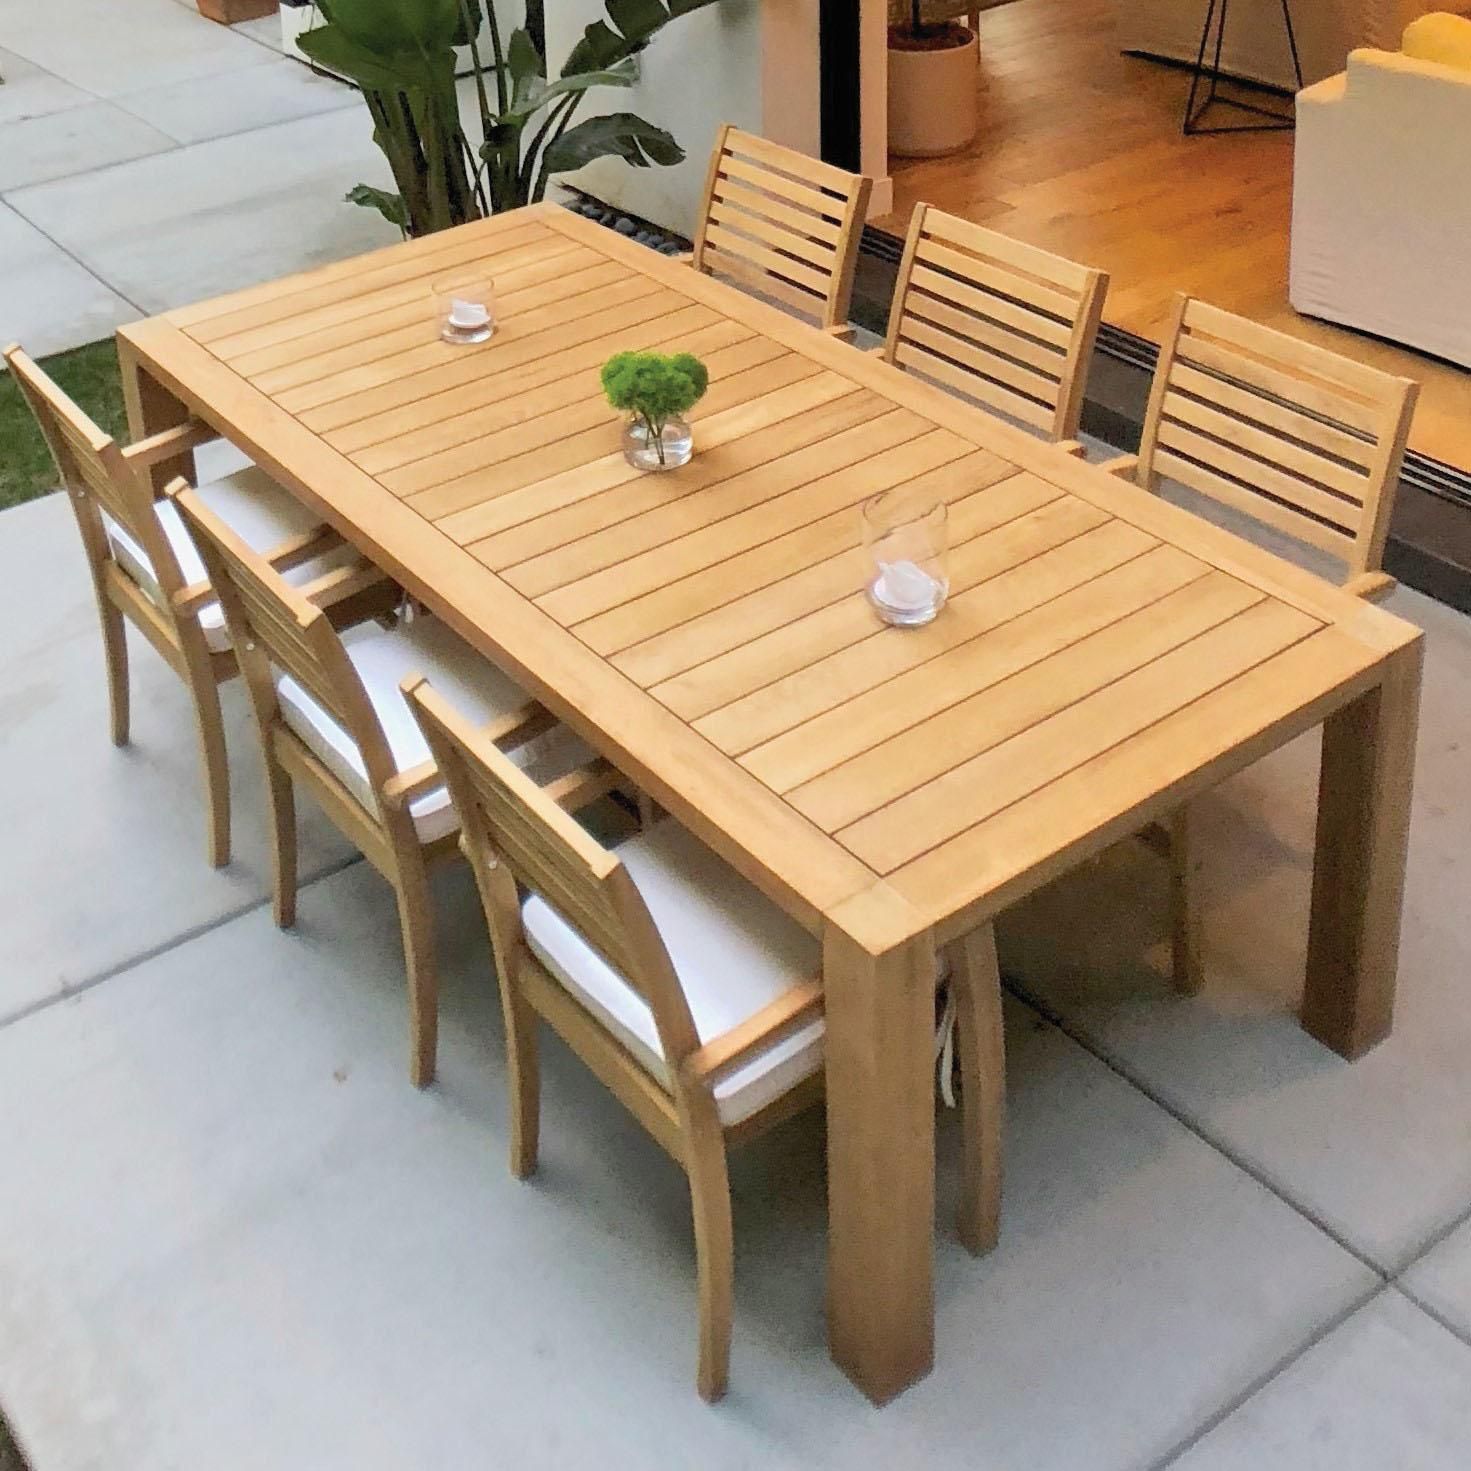 Avant 7 Piece Teak Patio Dining Set W/ 94 X 44 Inch Rectangular Table In Teak Outdoor Square Dining Sets (View 11 of 15)